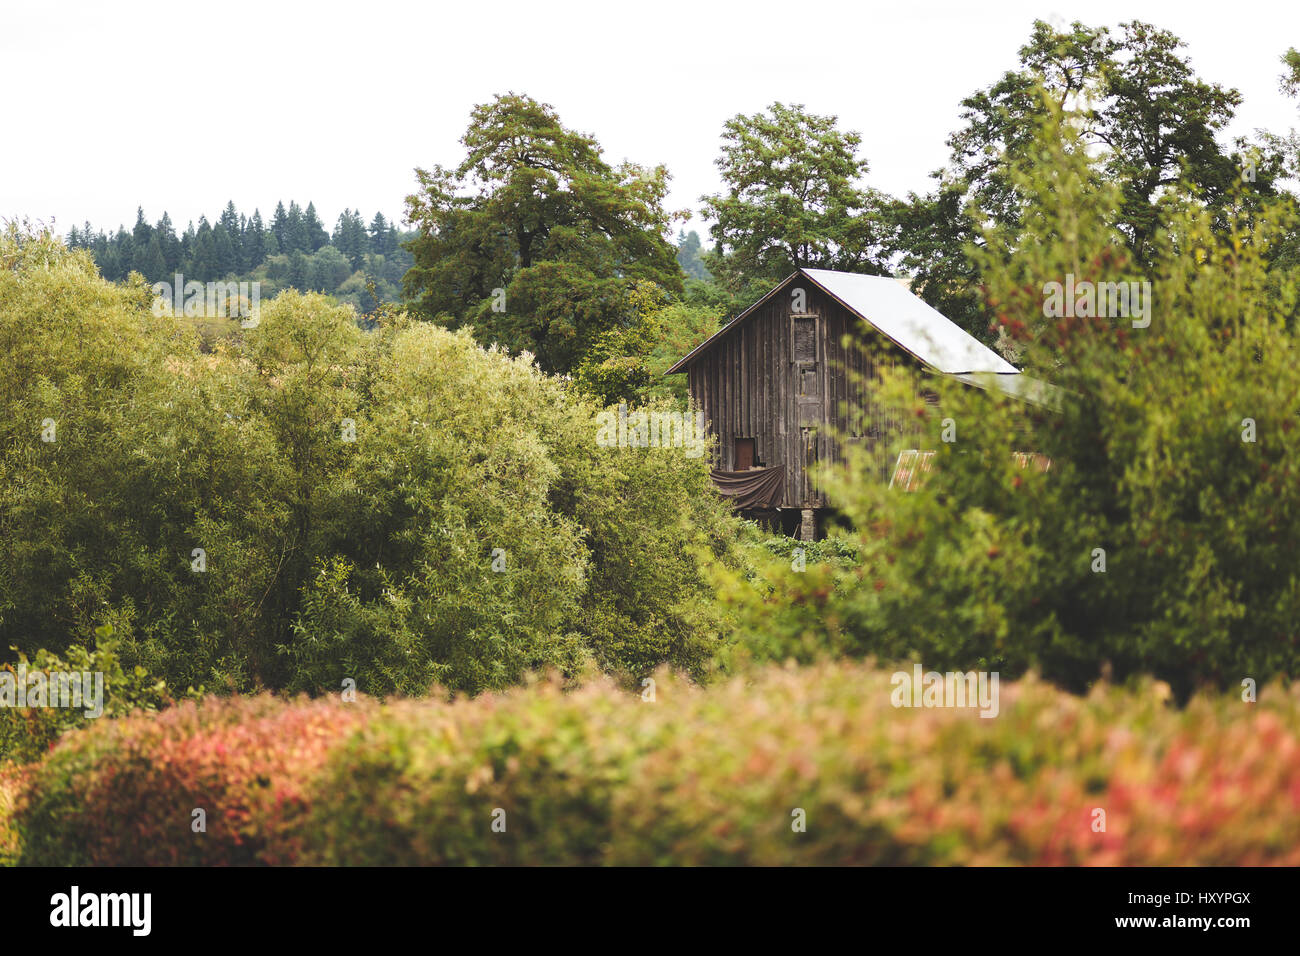 Wooden farm building in a lush forest setting in Lake Oswego, Oregon, USA. Stock Photo